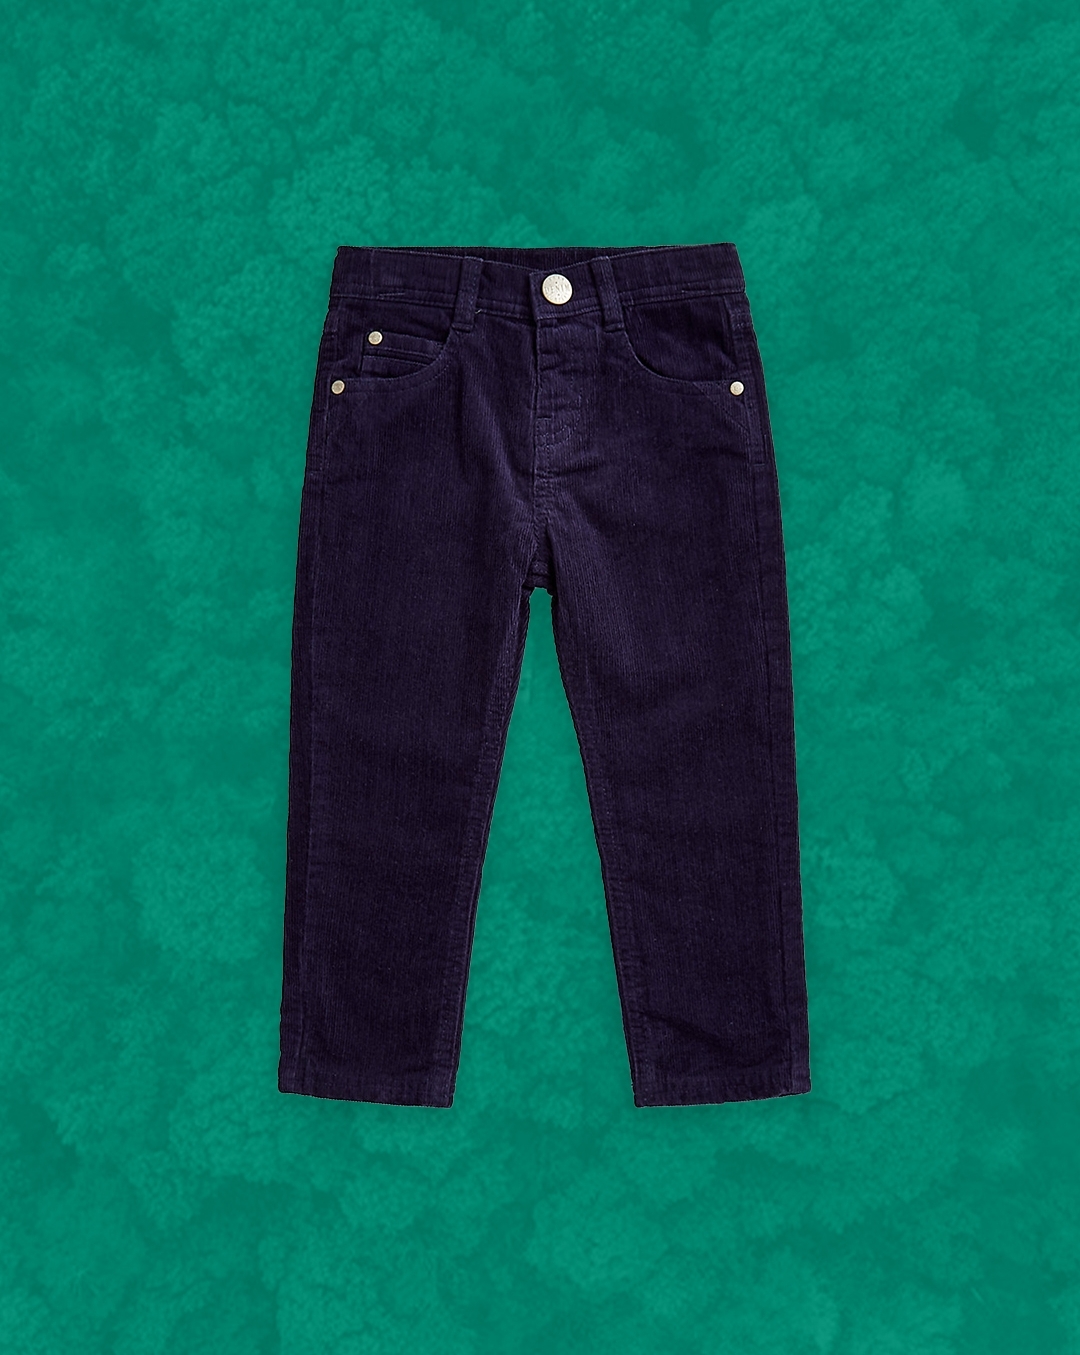 Buy Navy Blue Mens Corduroy Pants Limited Edition Dark Blue Online in India   Etsy